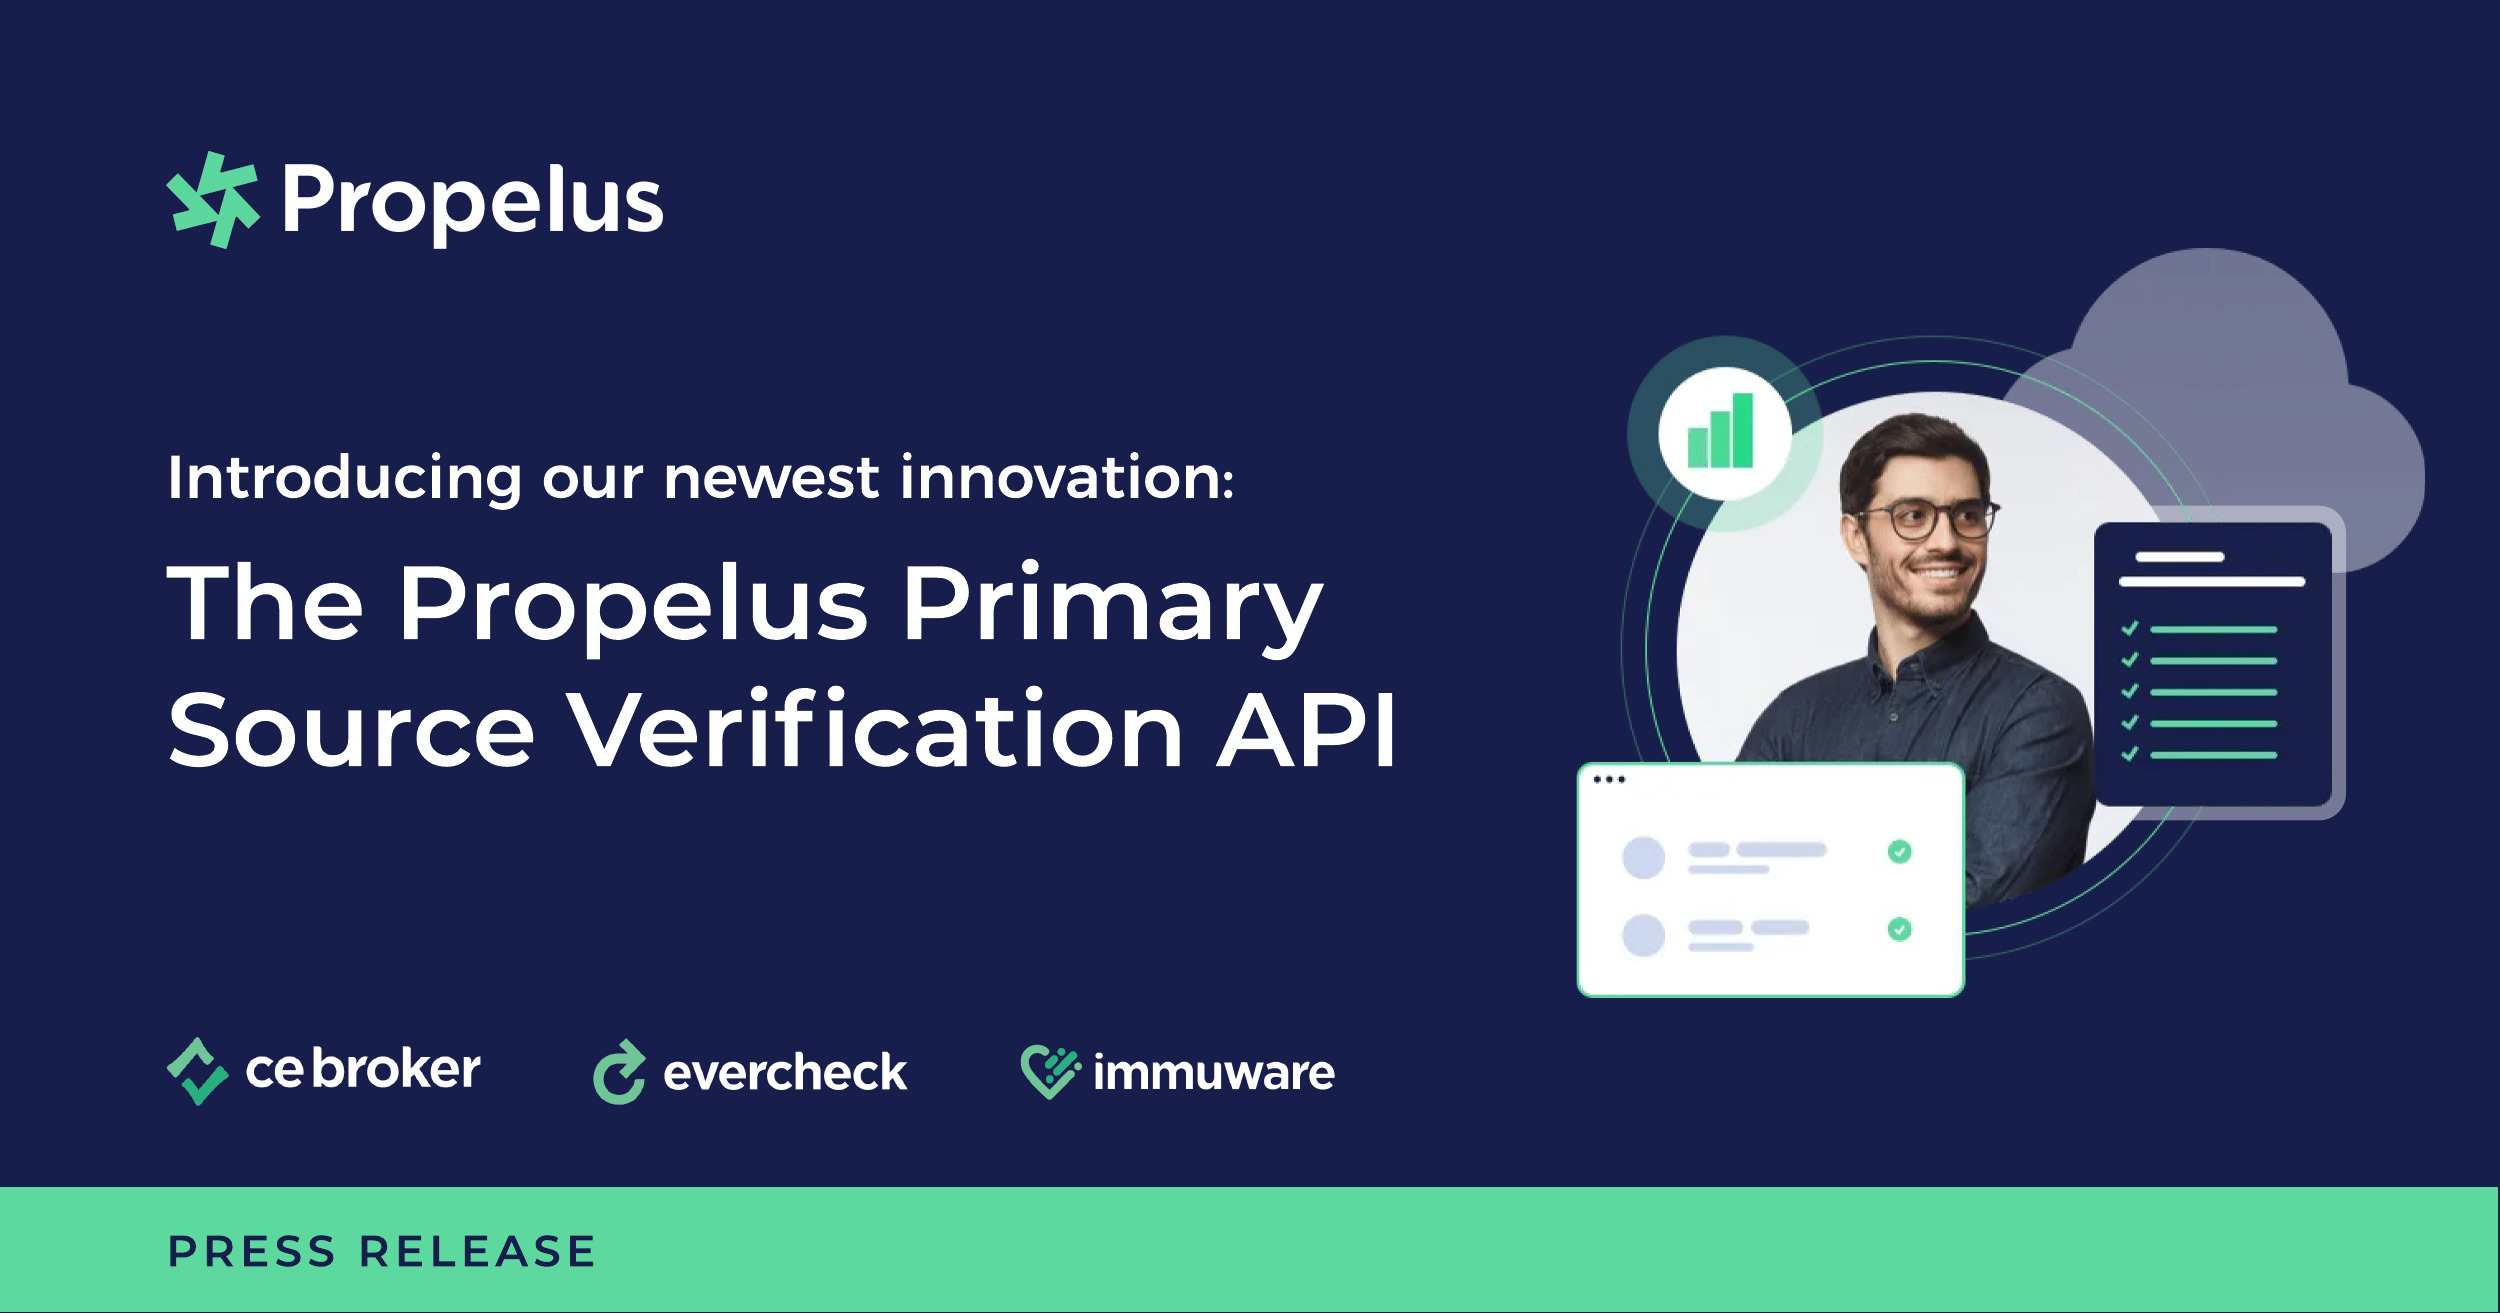 Propelus Adds New Primary Source Verification API Solution to Its Offerings